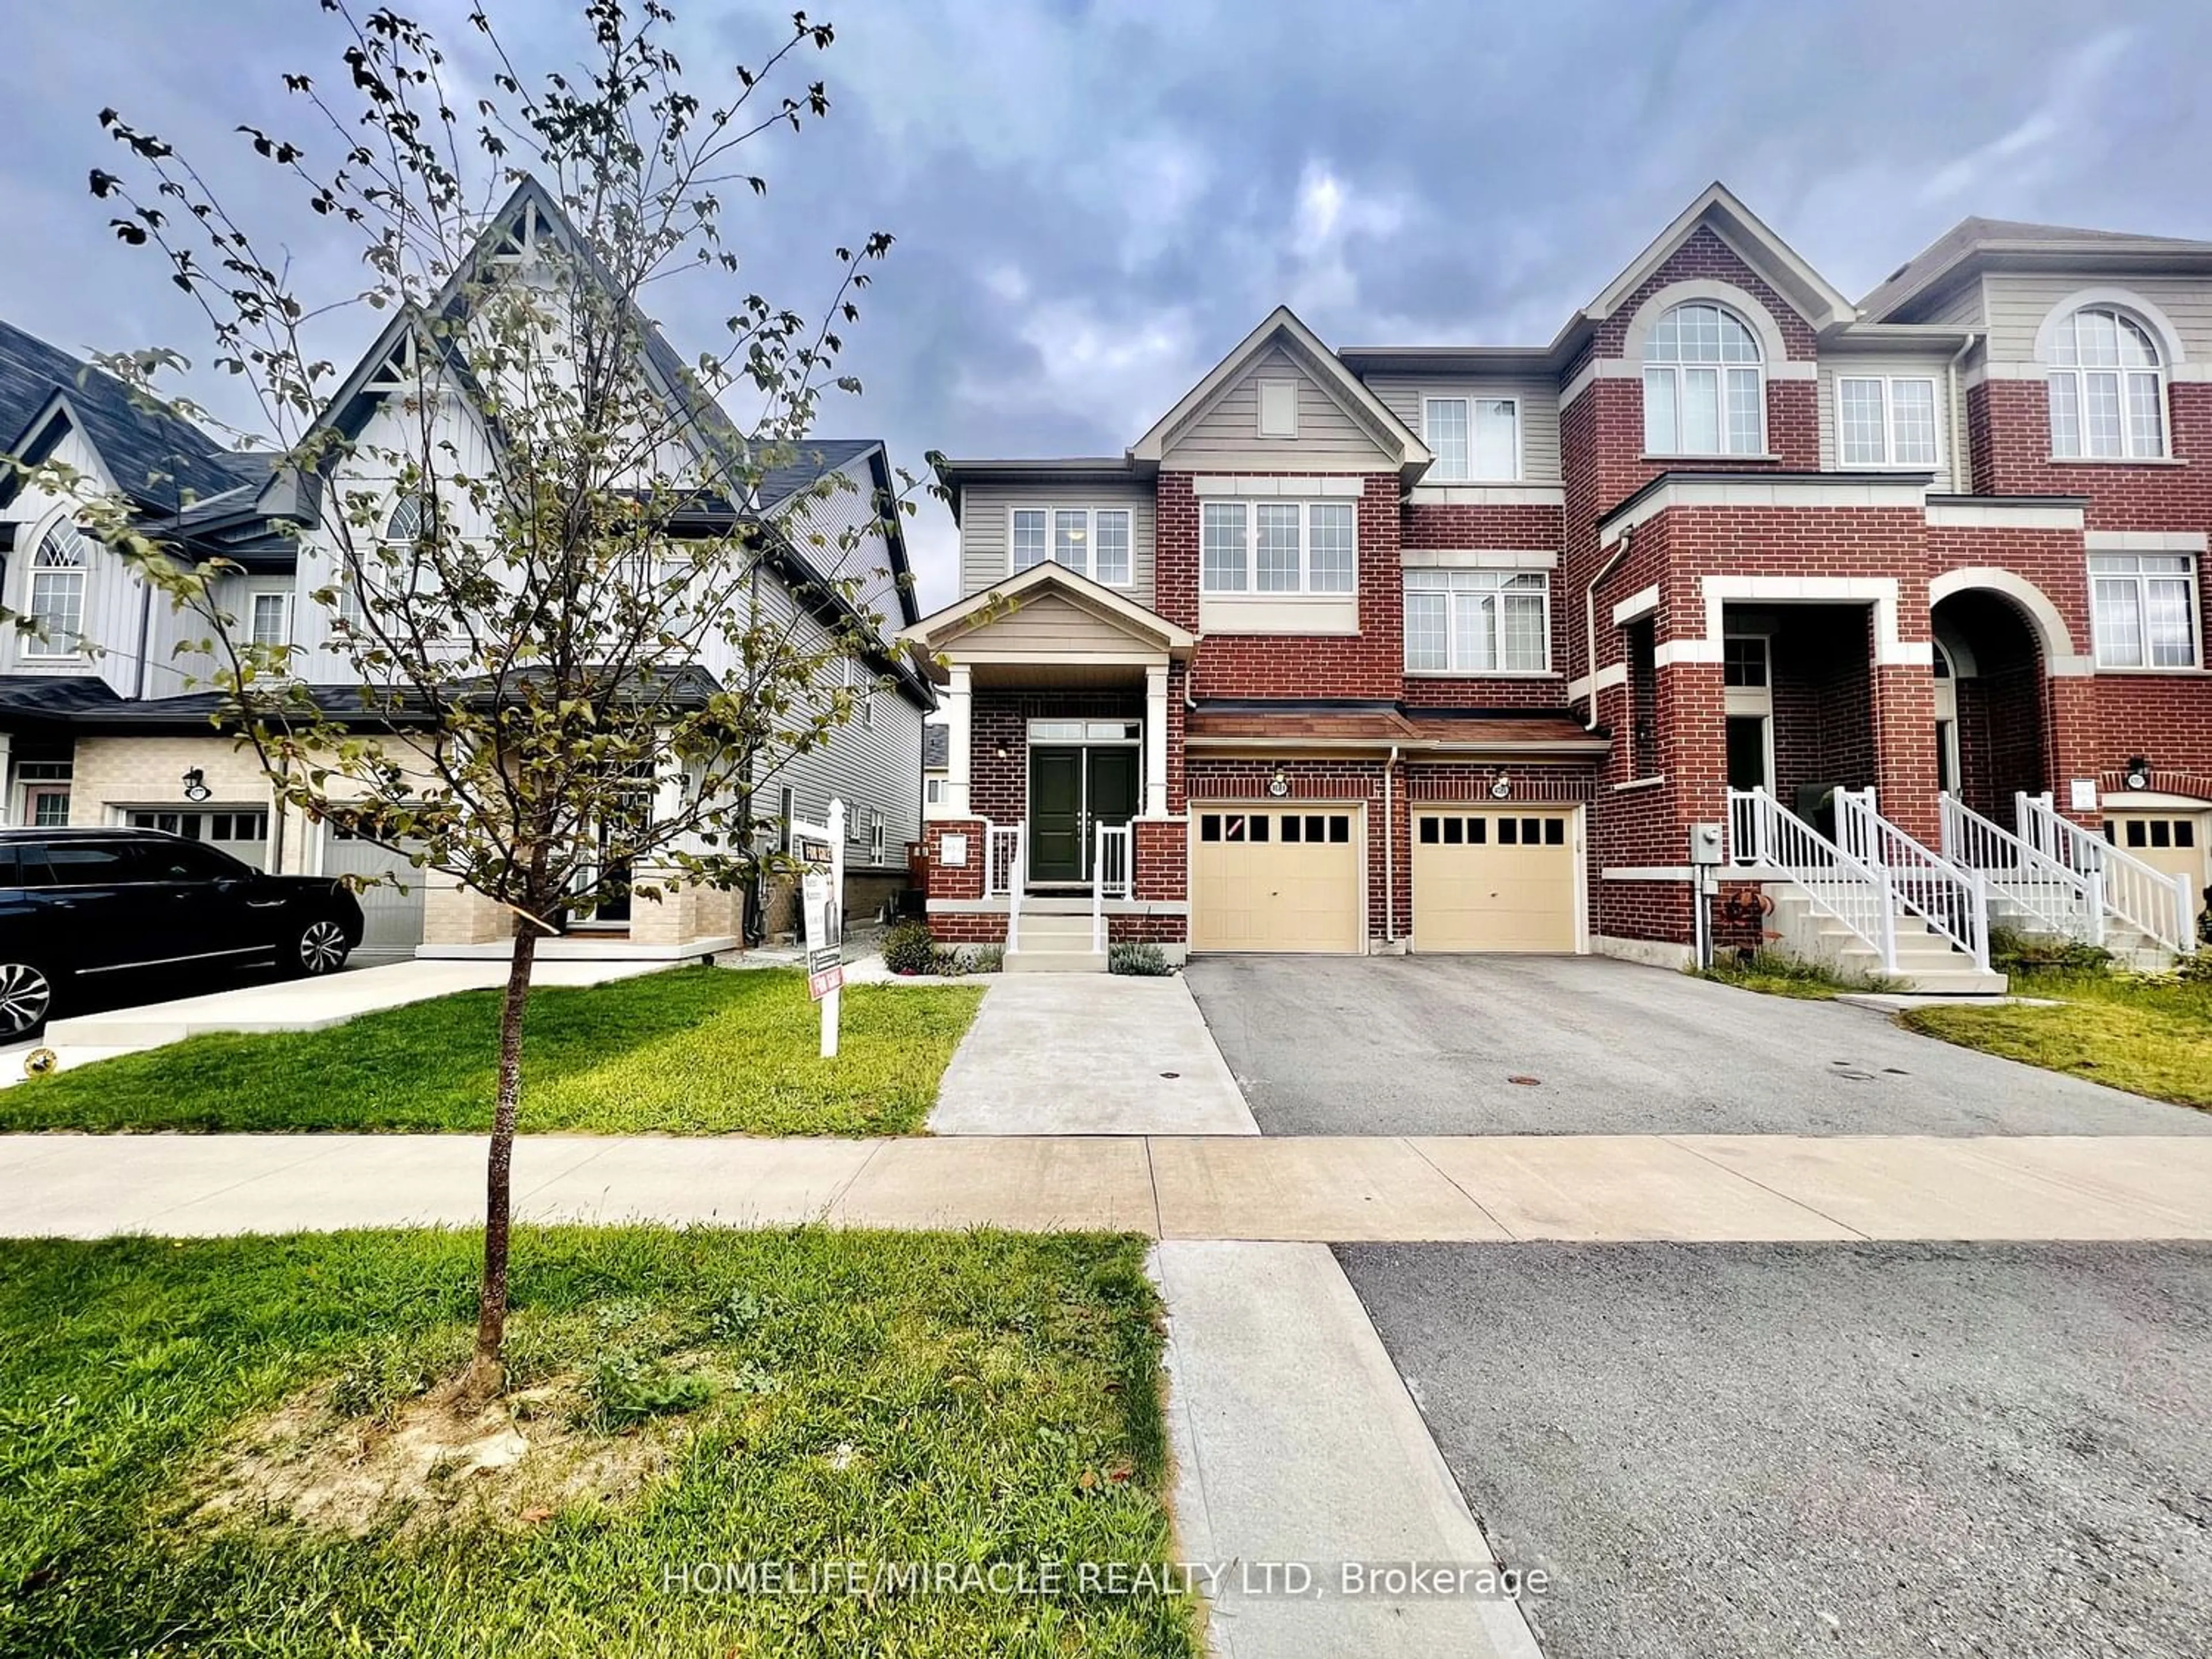 Frontside or backside of a home for 4081 Canby St, Lincoln Ontario L0R 1B0